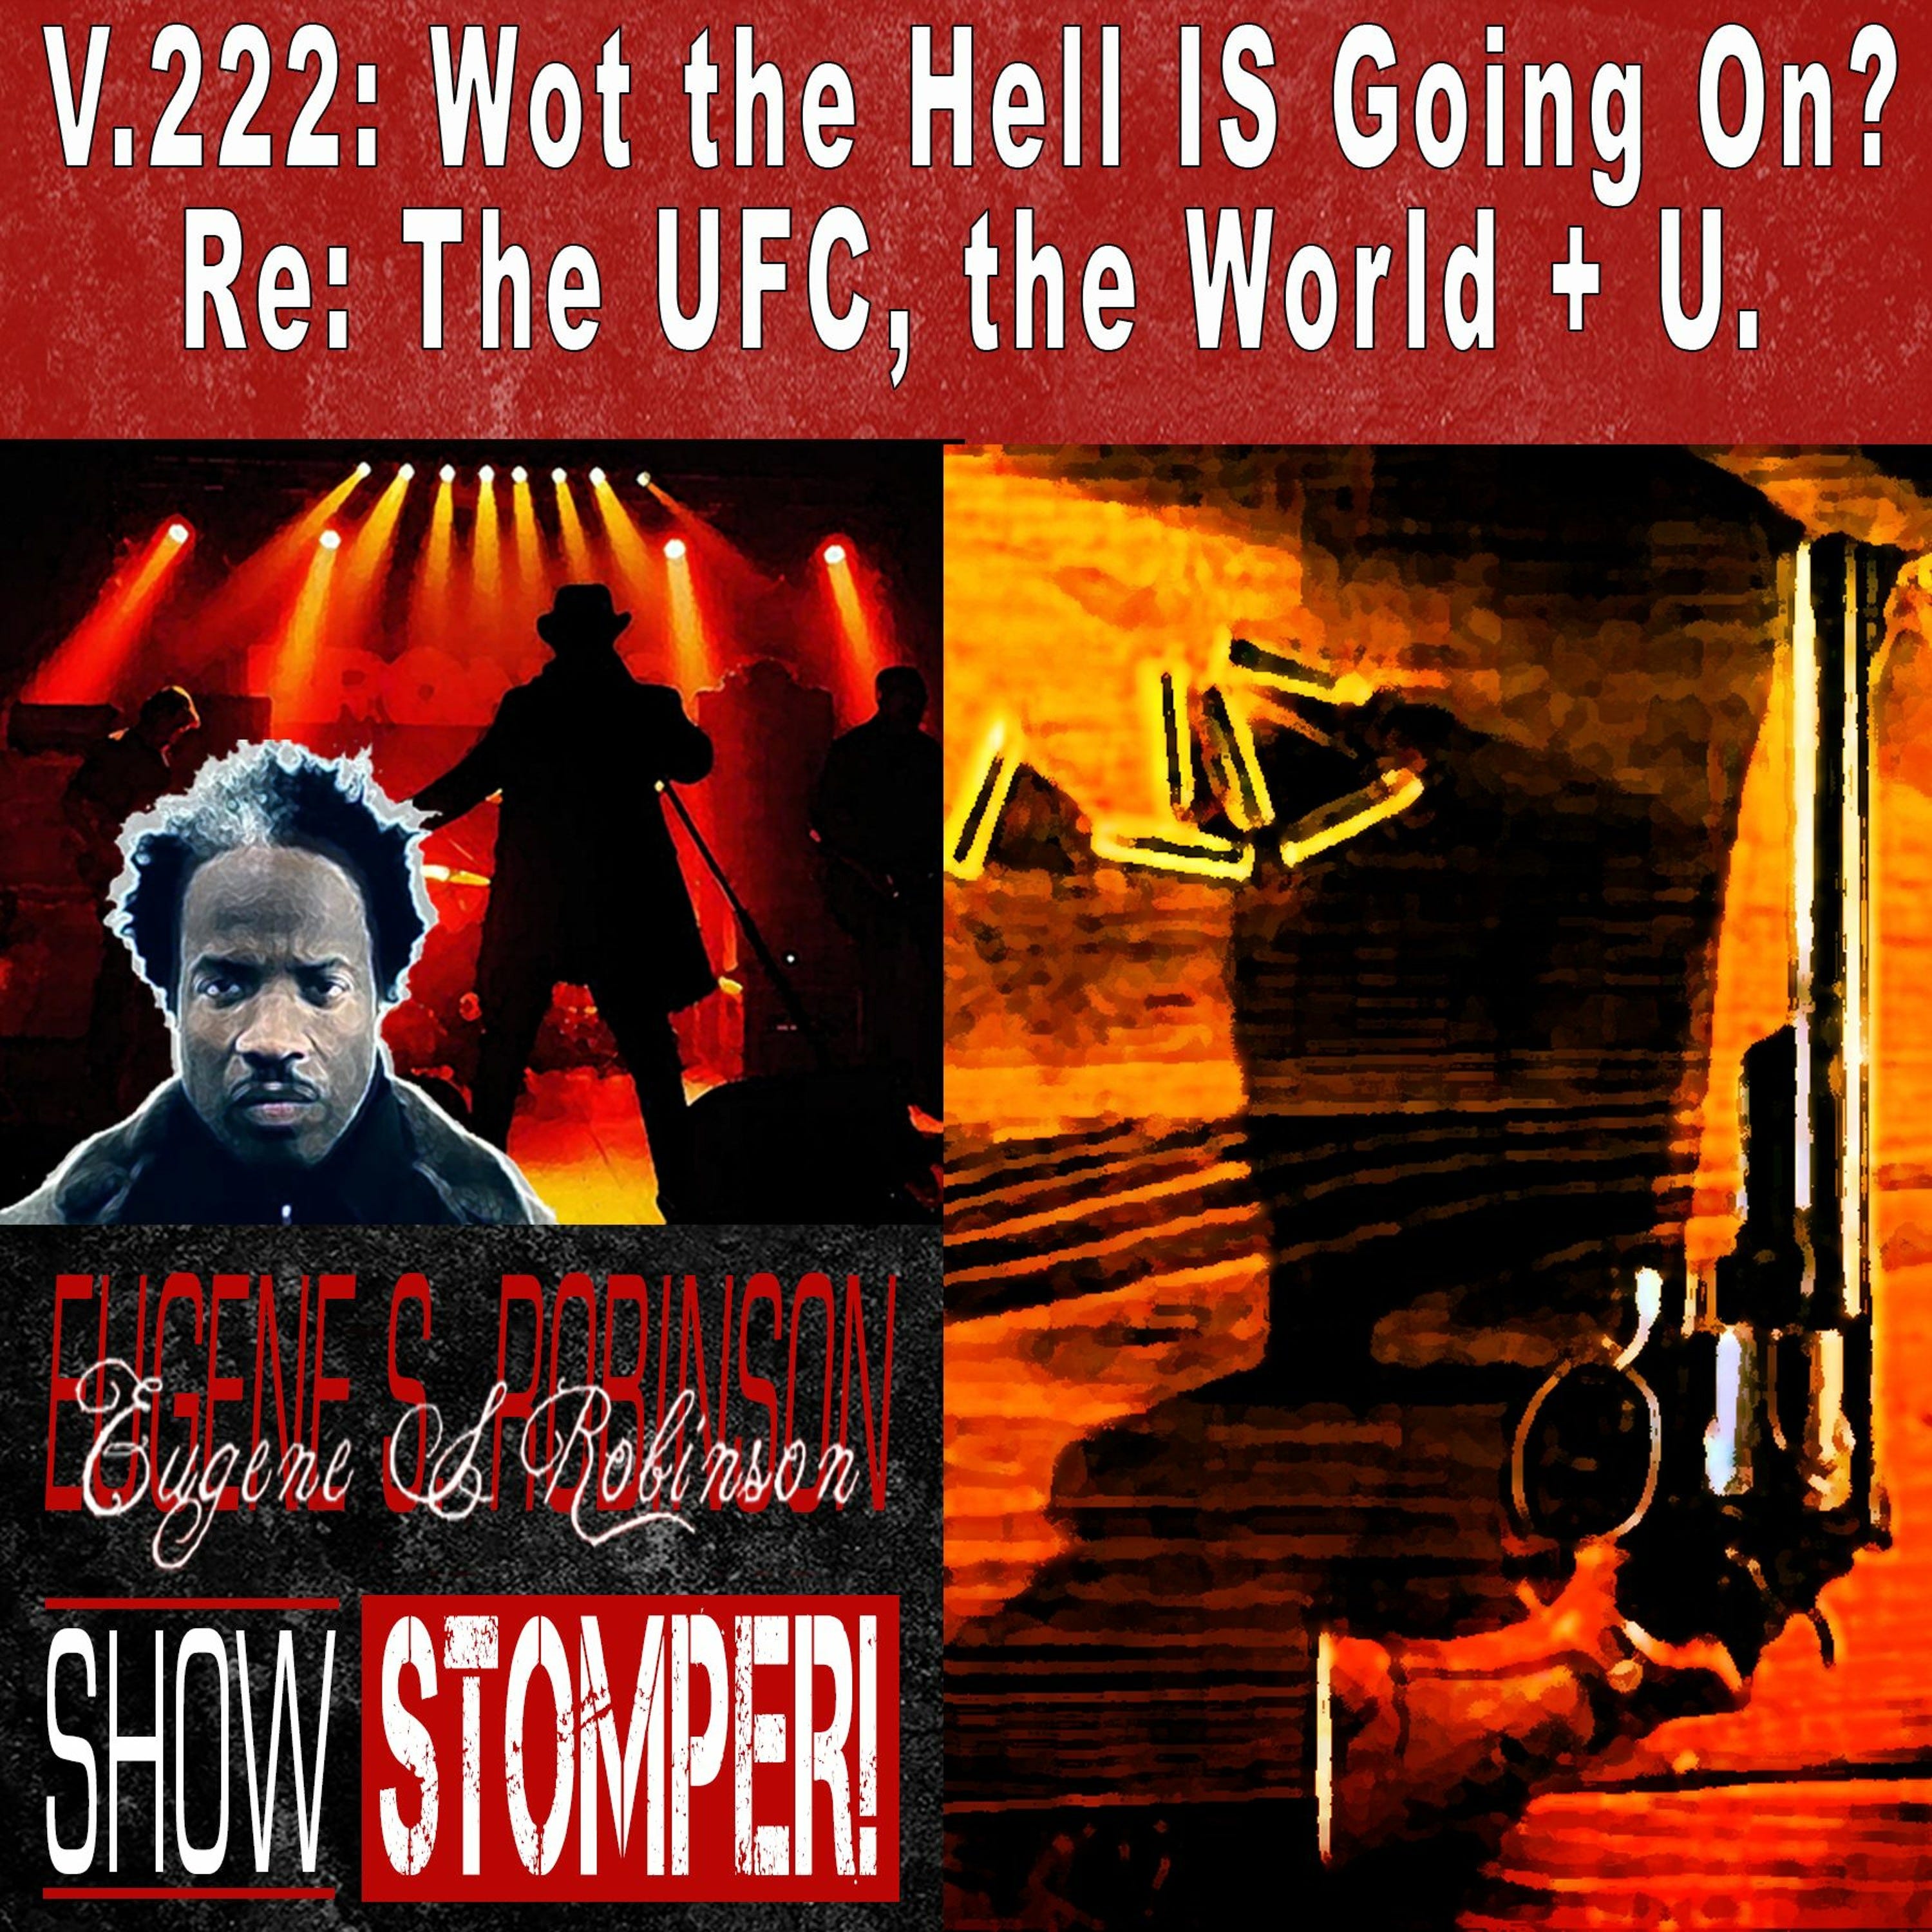 V.222: Wot the Hell IS Going On? Re: The UFC, the World + U. On The Eugene S. Robinson Show Stomper!